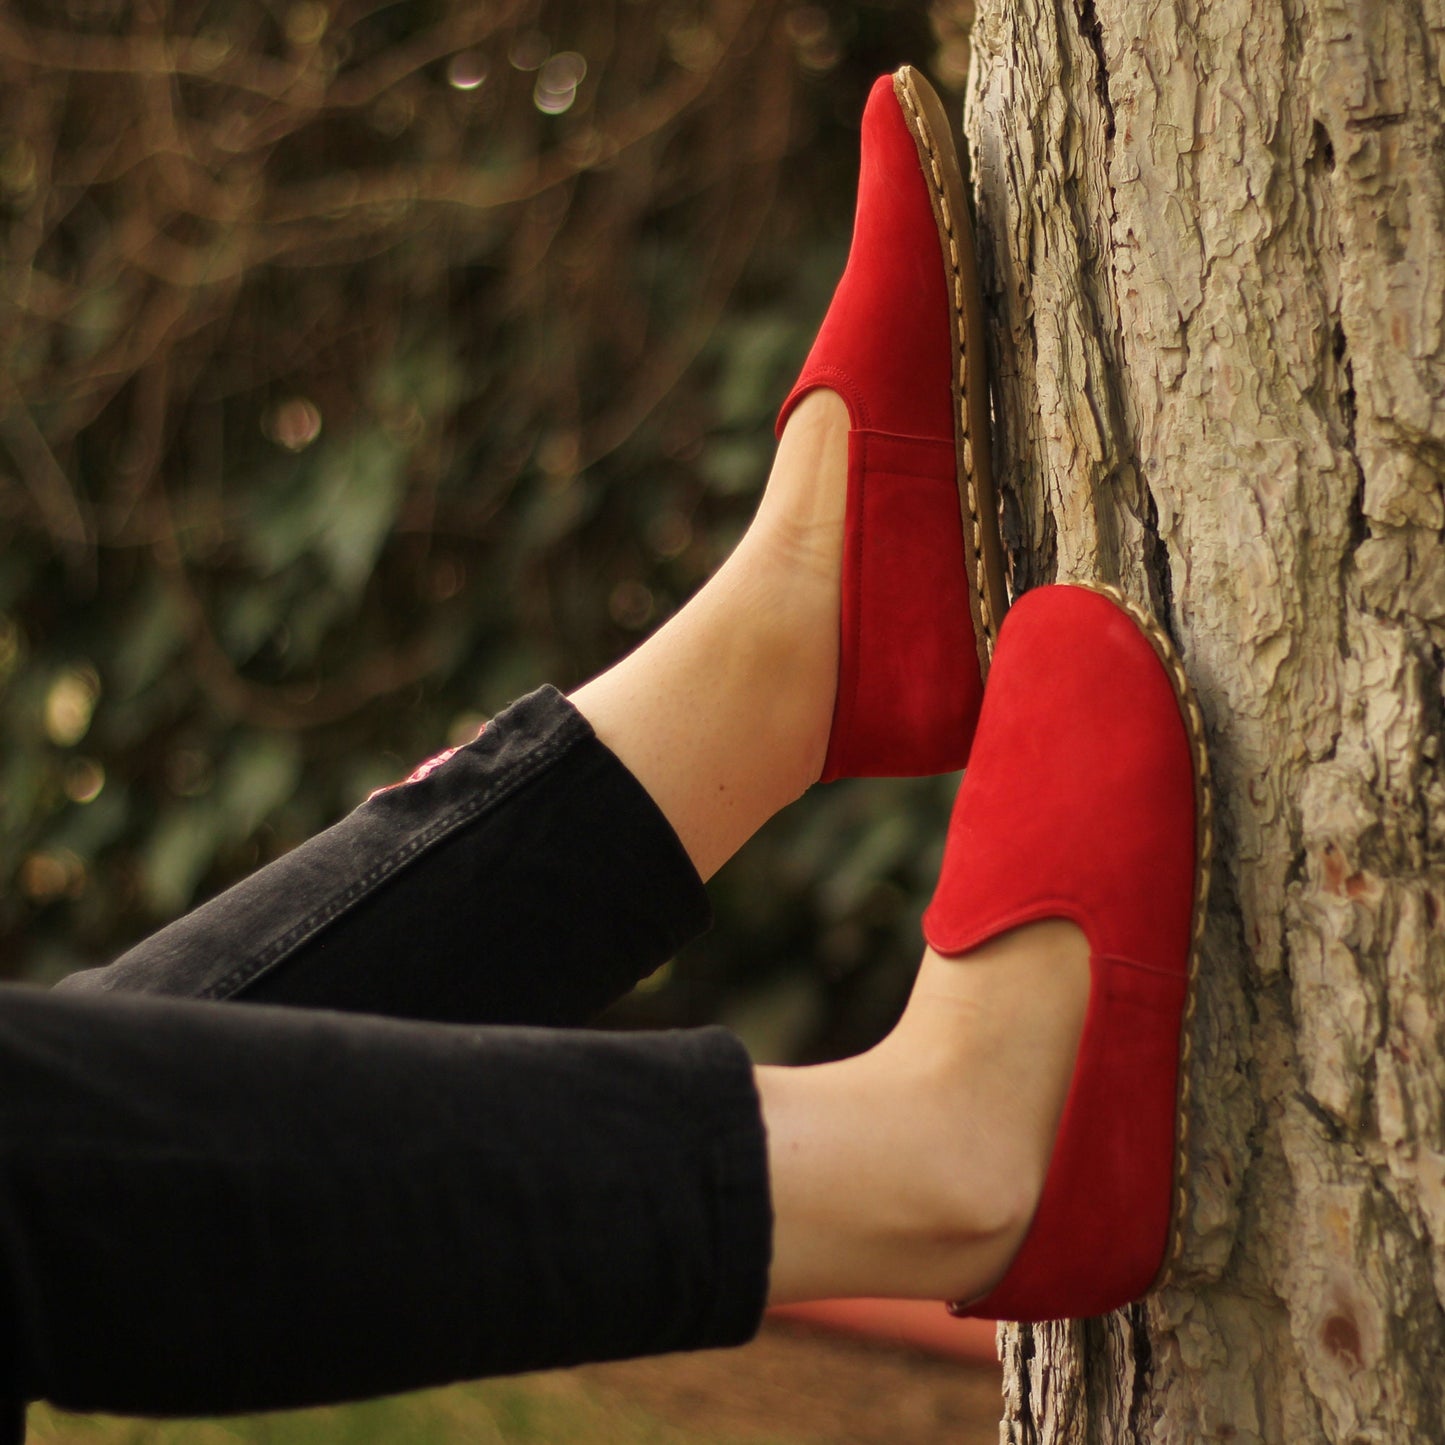 Women - Handmade - Barefoot - Leather Shoes, Calssic - Red Nubuck